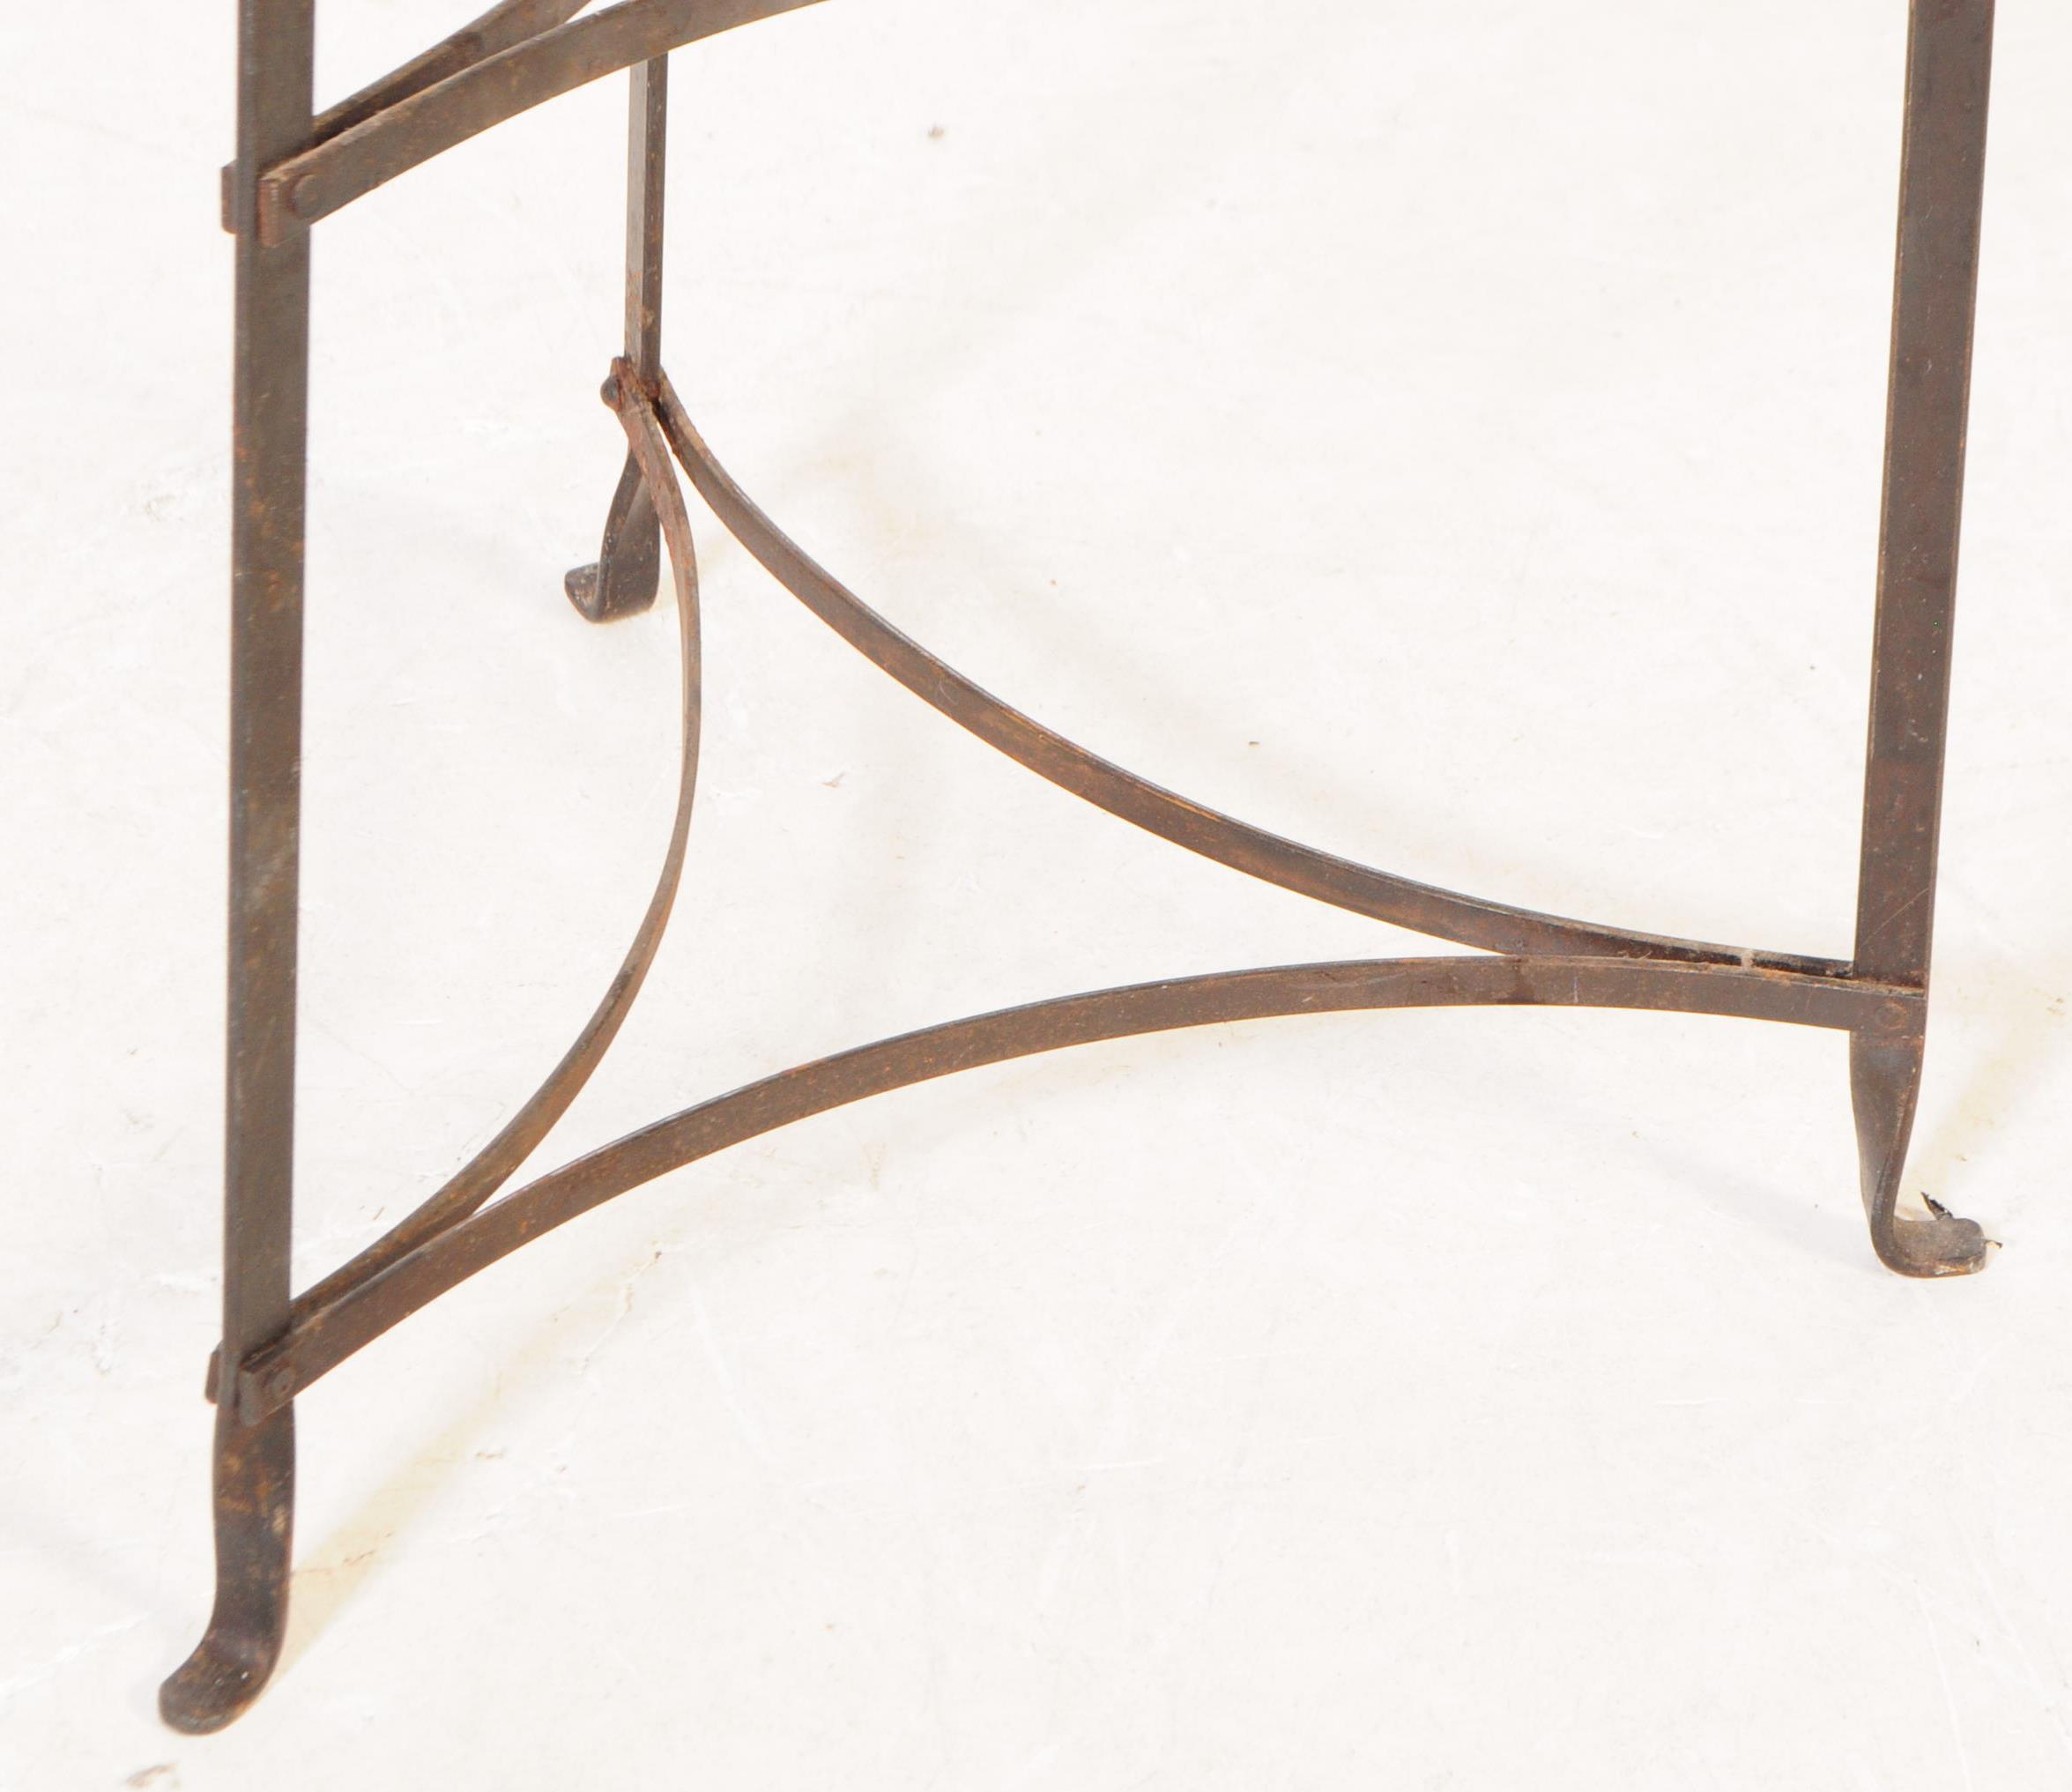 VINTAGE 20TH CENTURY WROUGHT IRON SEVEN TIER PLANT STAND - Image 3 of 3